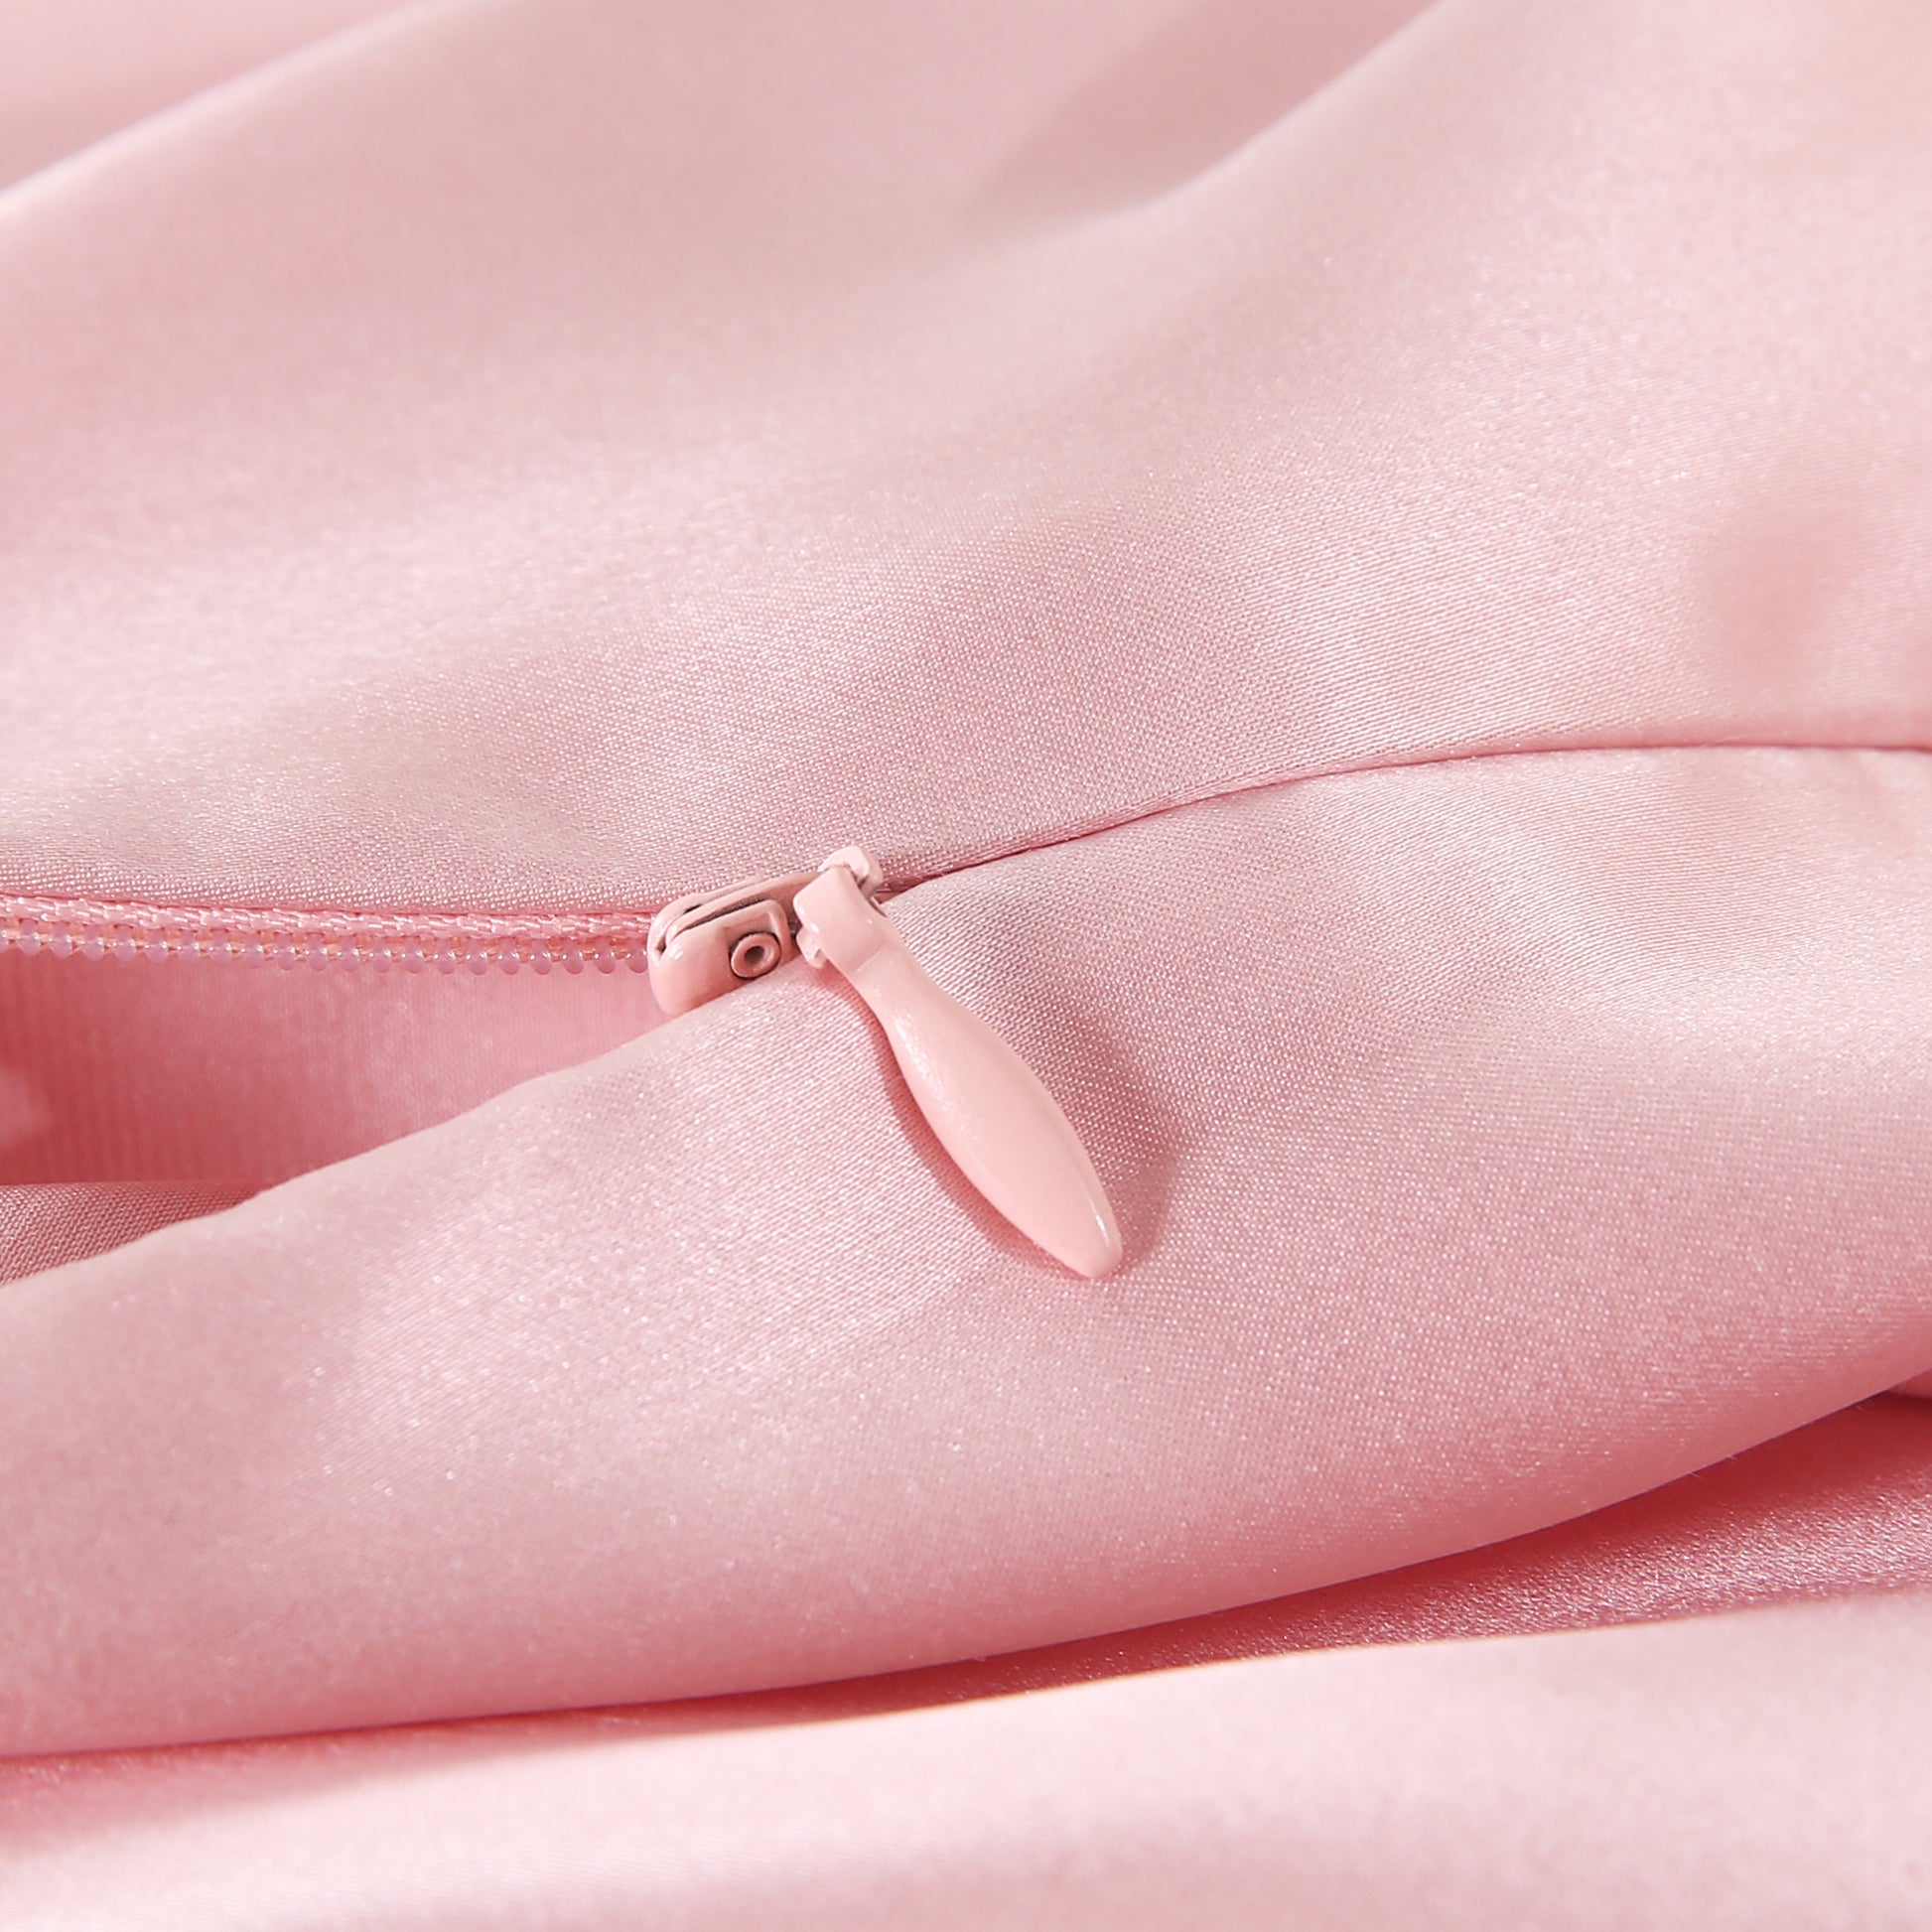 Image of a Sedosa pillowcase, focusing on the invisible zipper closing